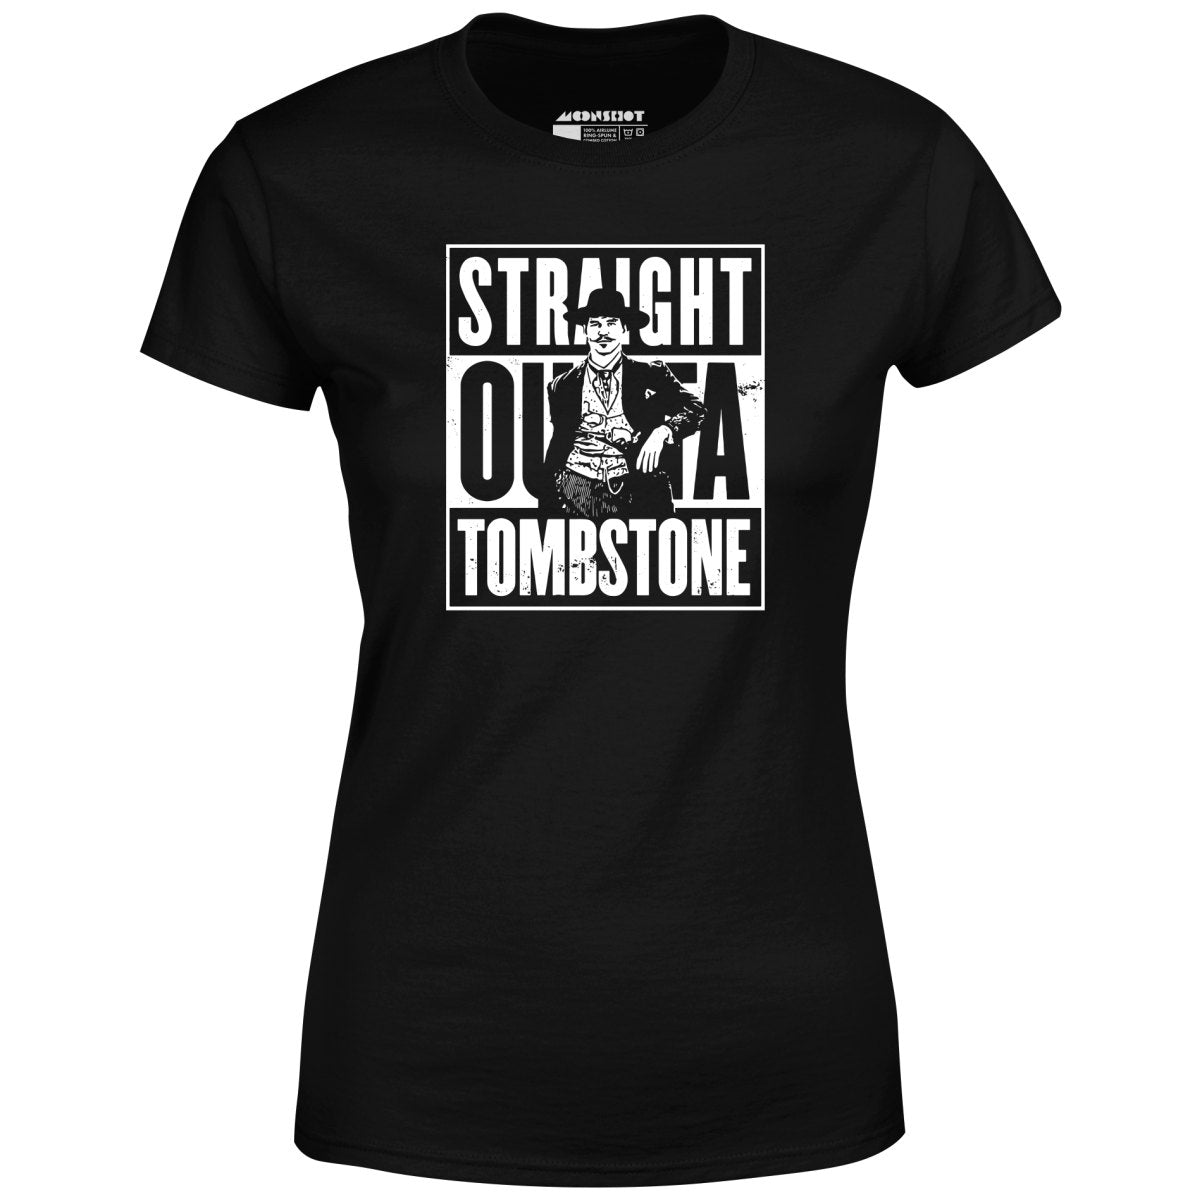 Straight Outta Tombstone - Women's T-Shirt